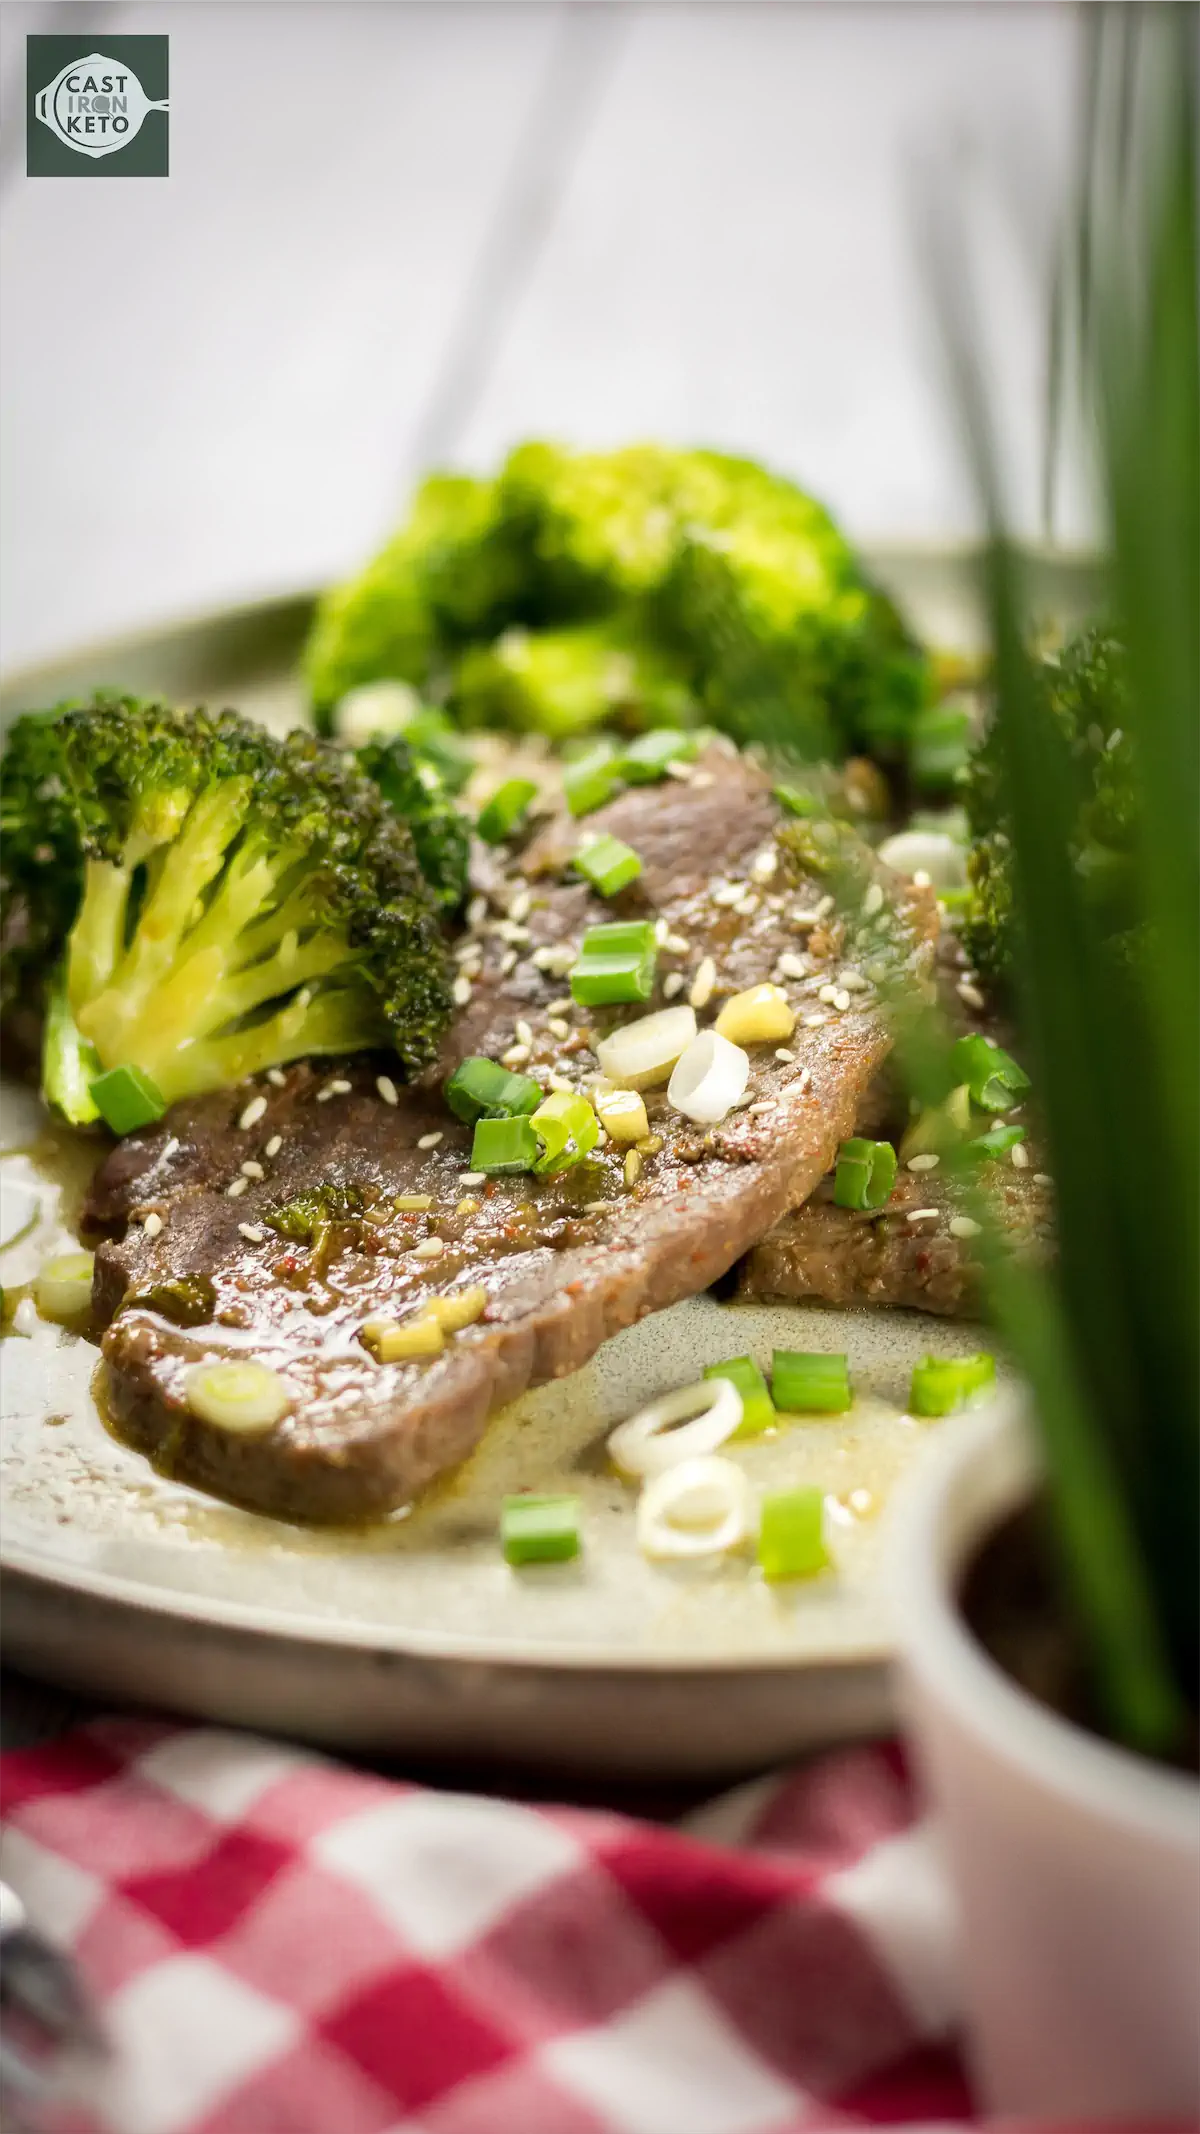 Keto-friendly beef and broccoli recipe served on a plate on a kitchen table.